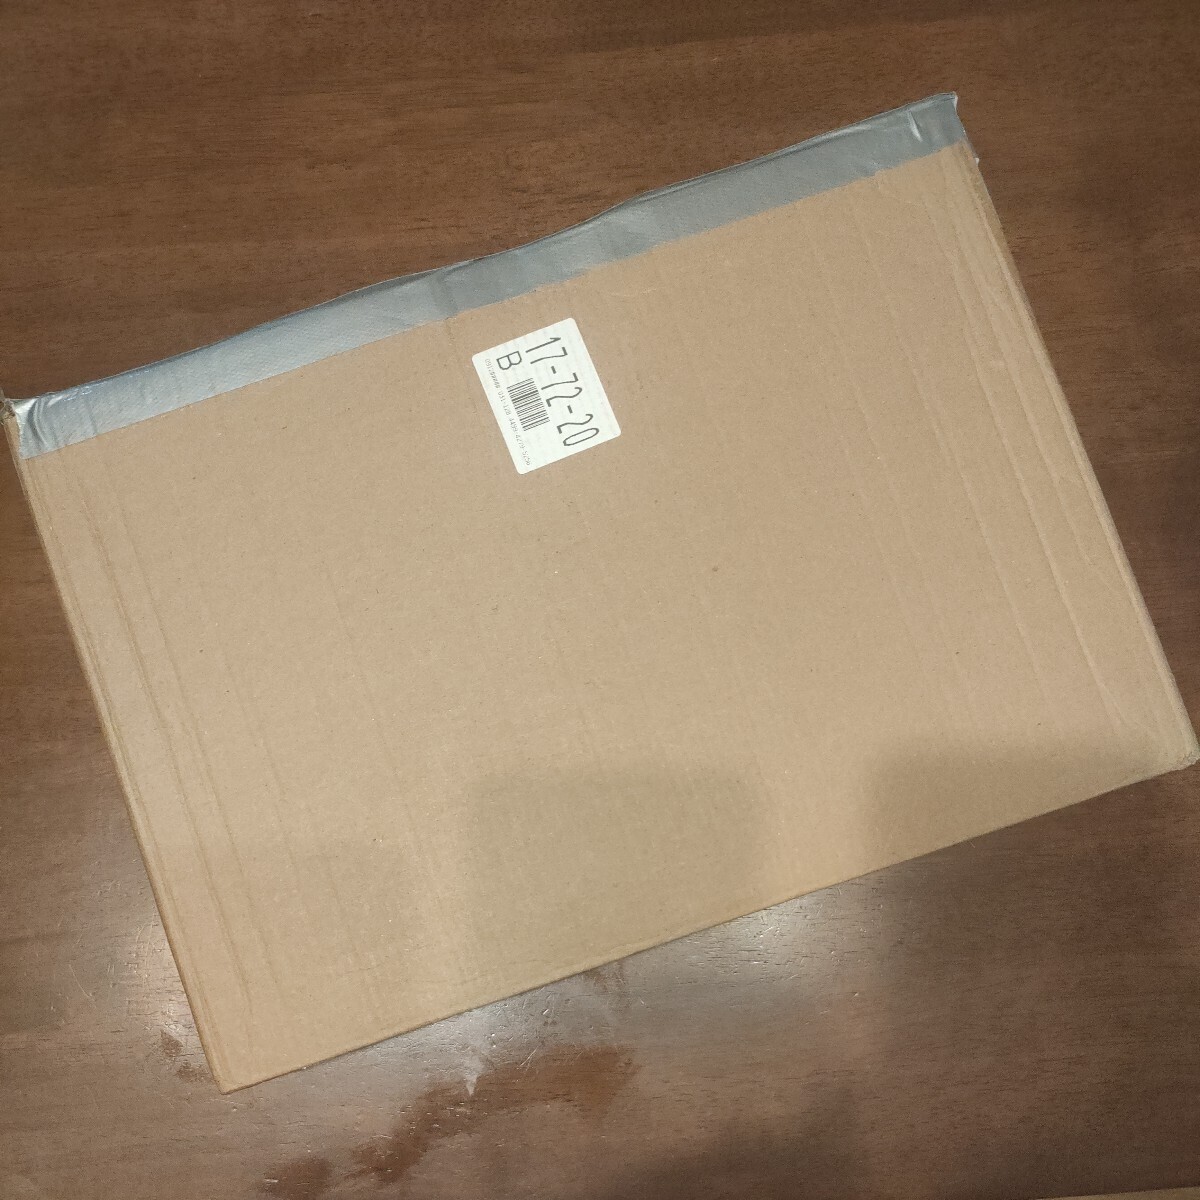 [ unused goods ][Hope Retailer] bamboo made book stand paper see pcs inclination pcs desk natural feeling of quality 6 -step adjustment (L size (39.0cm×28.0cm)